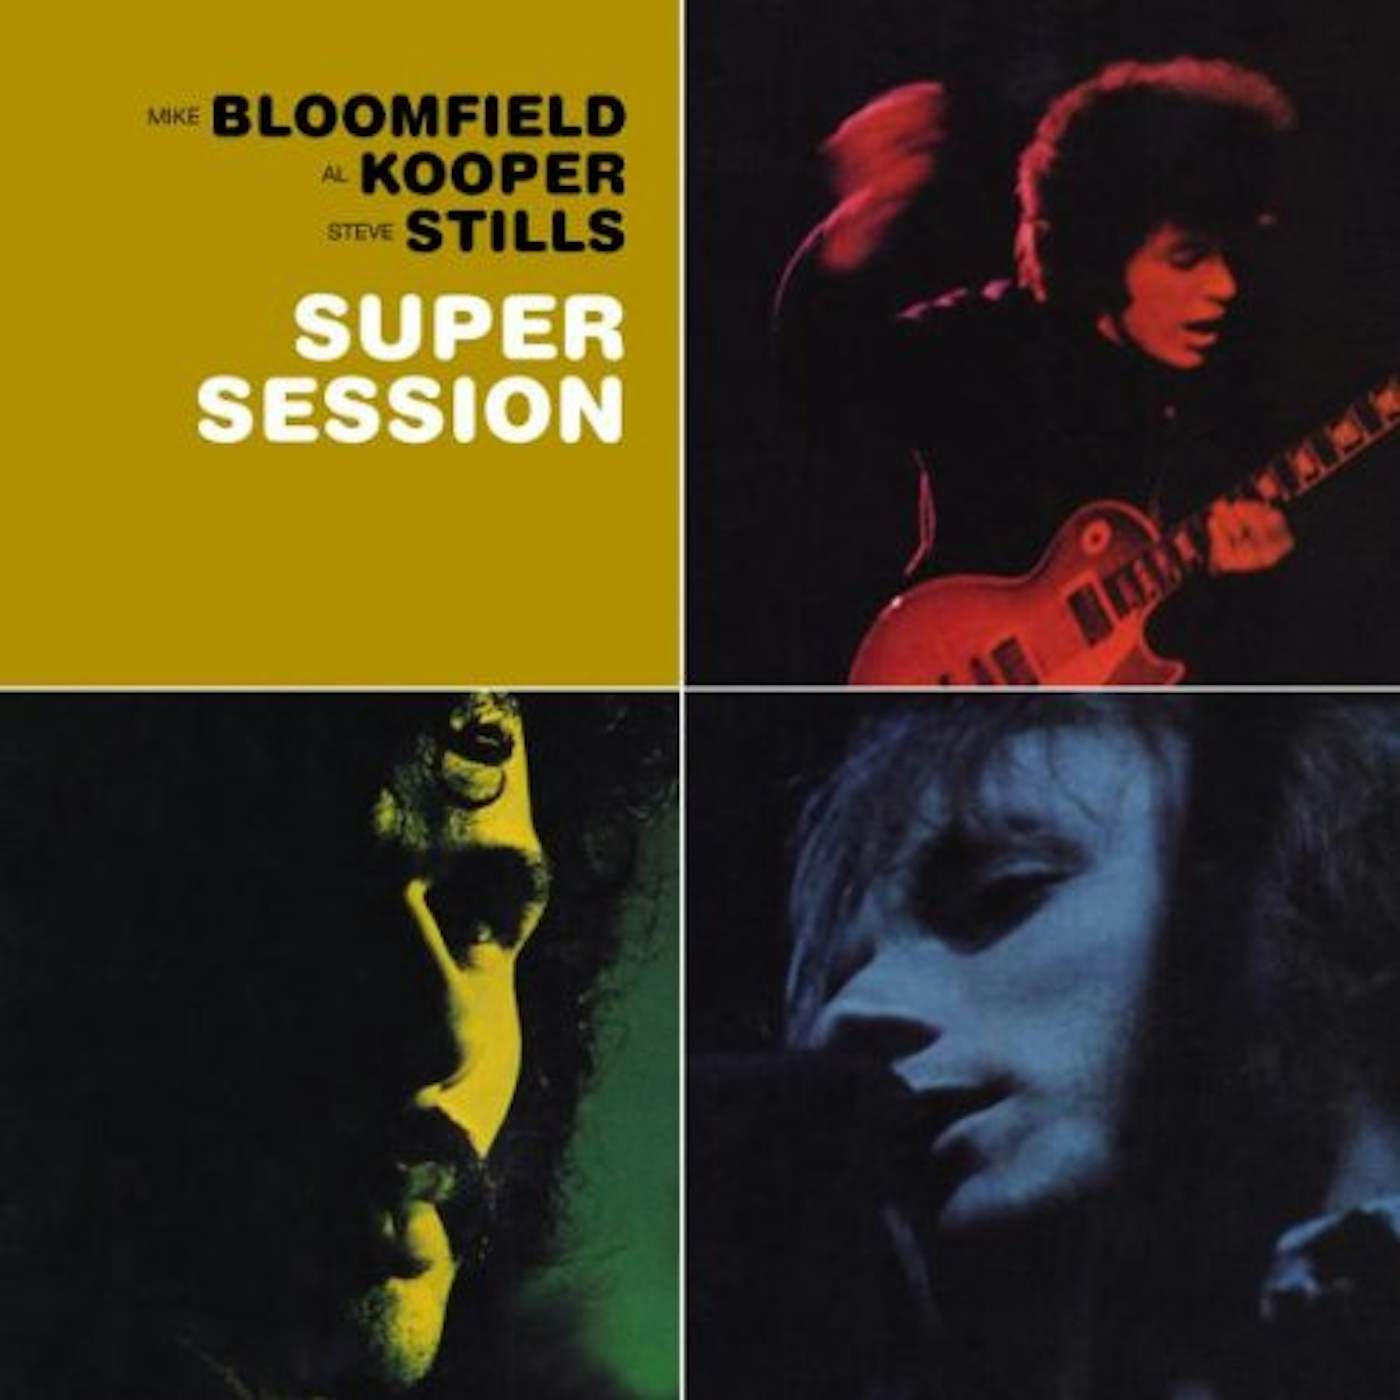 Mike Bloomfield SUPER SESSION CD